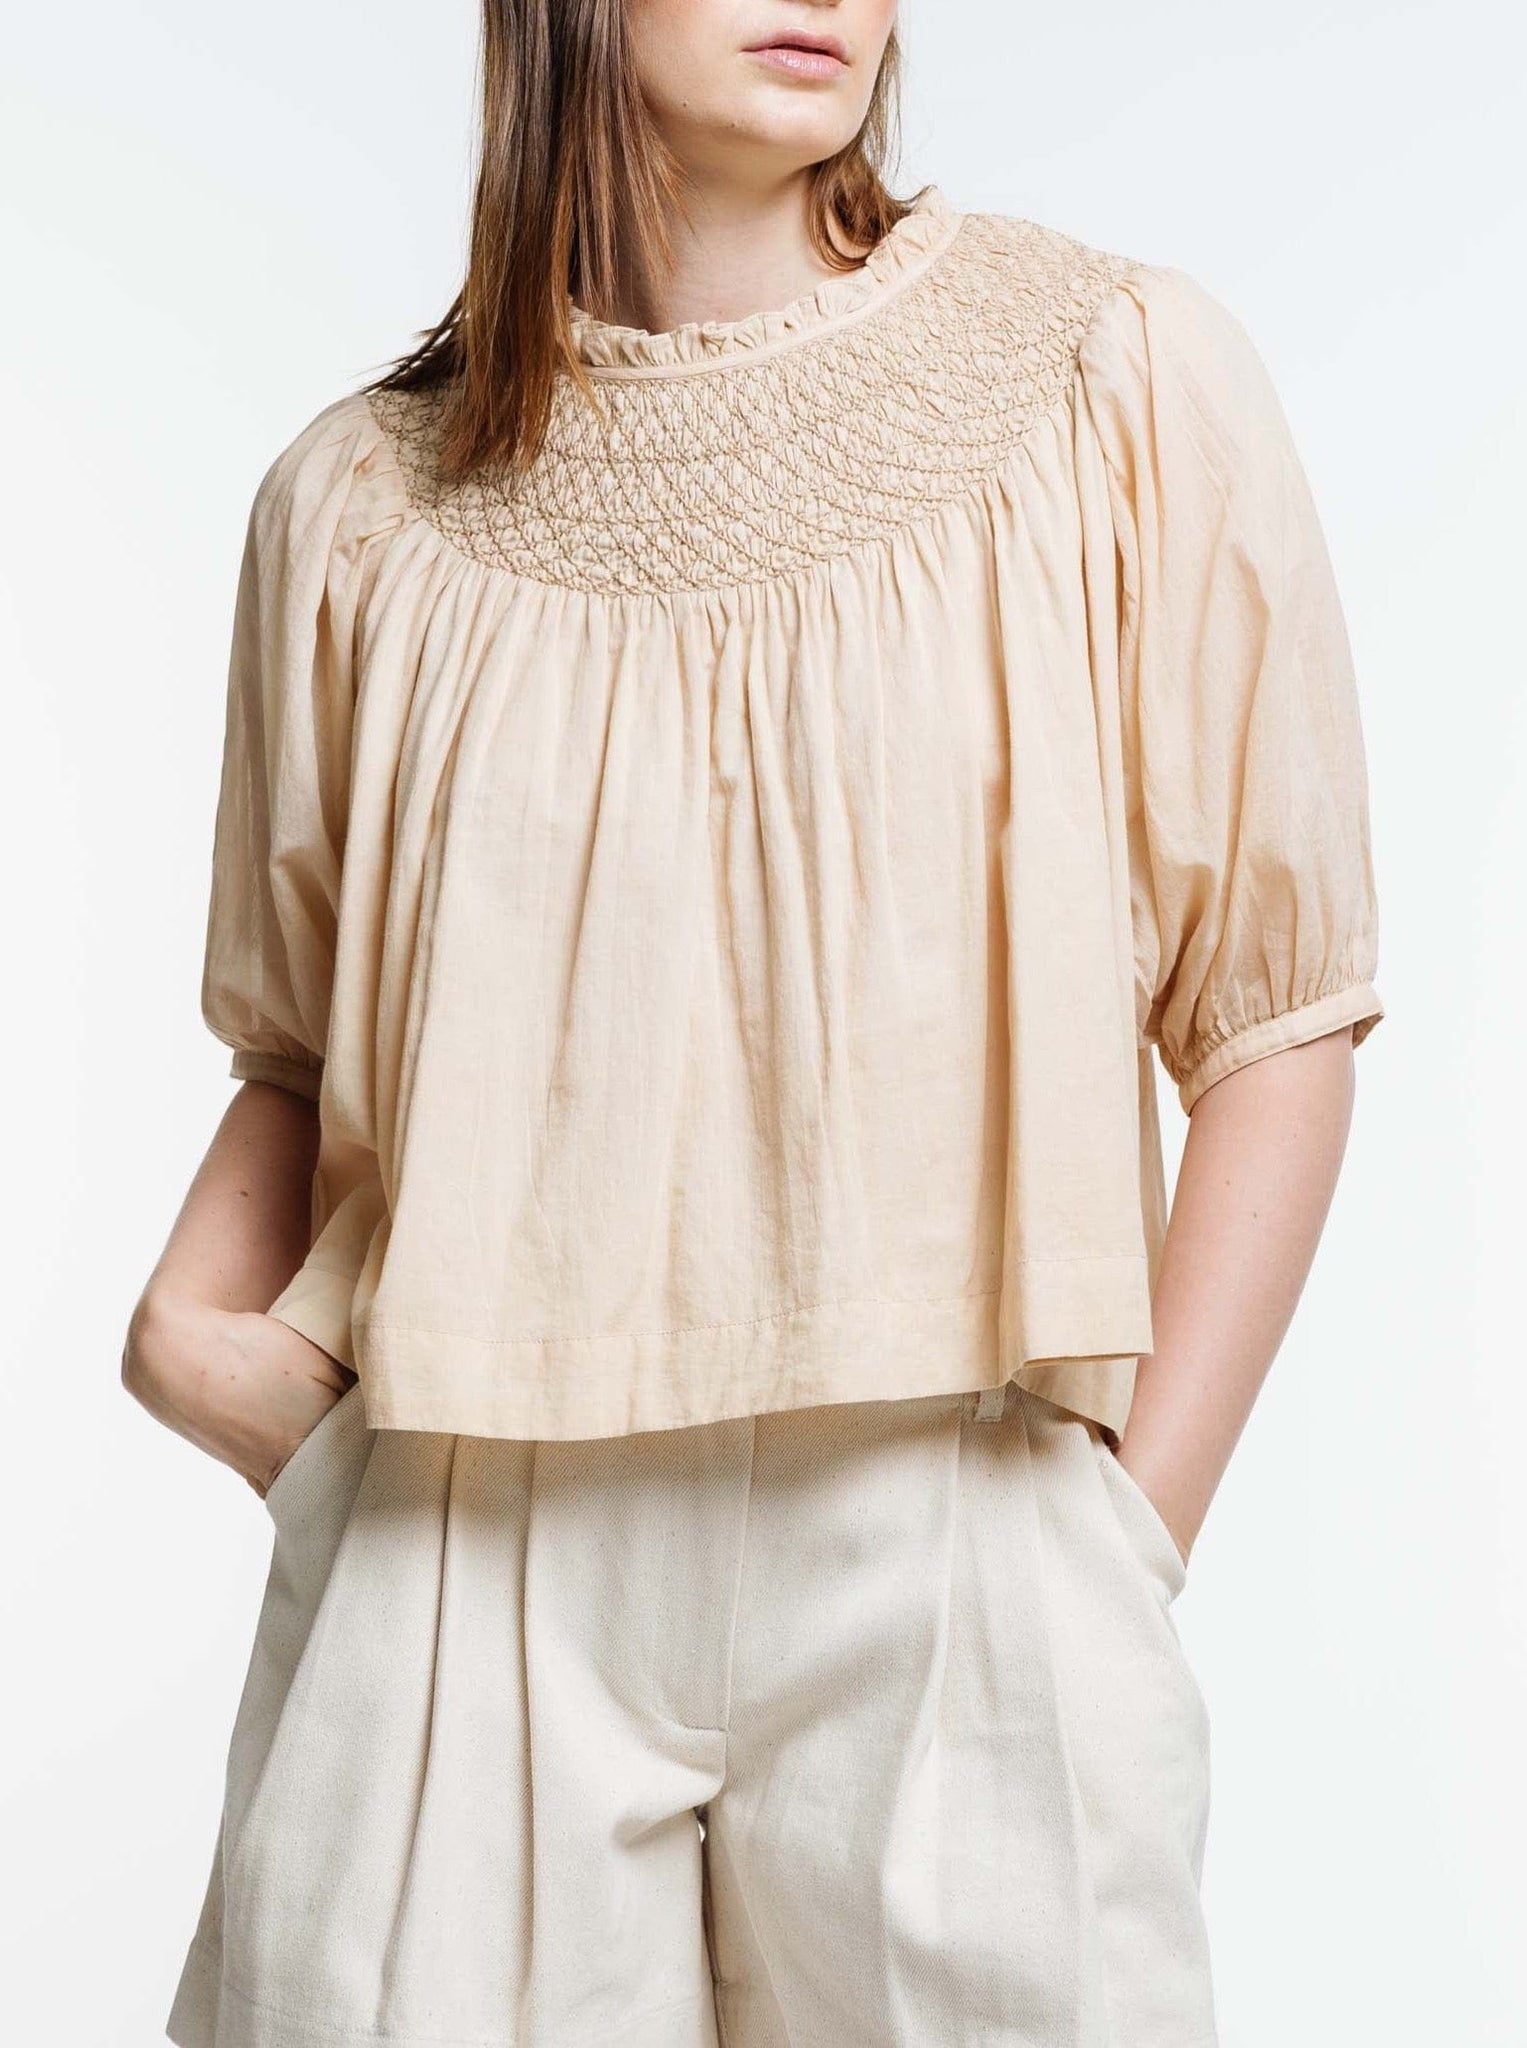 The model is wearing an Organic Cotton Lena Top.